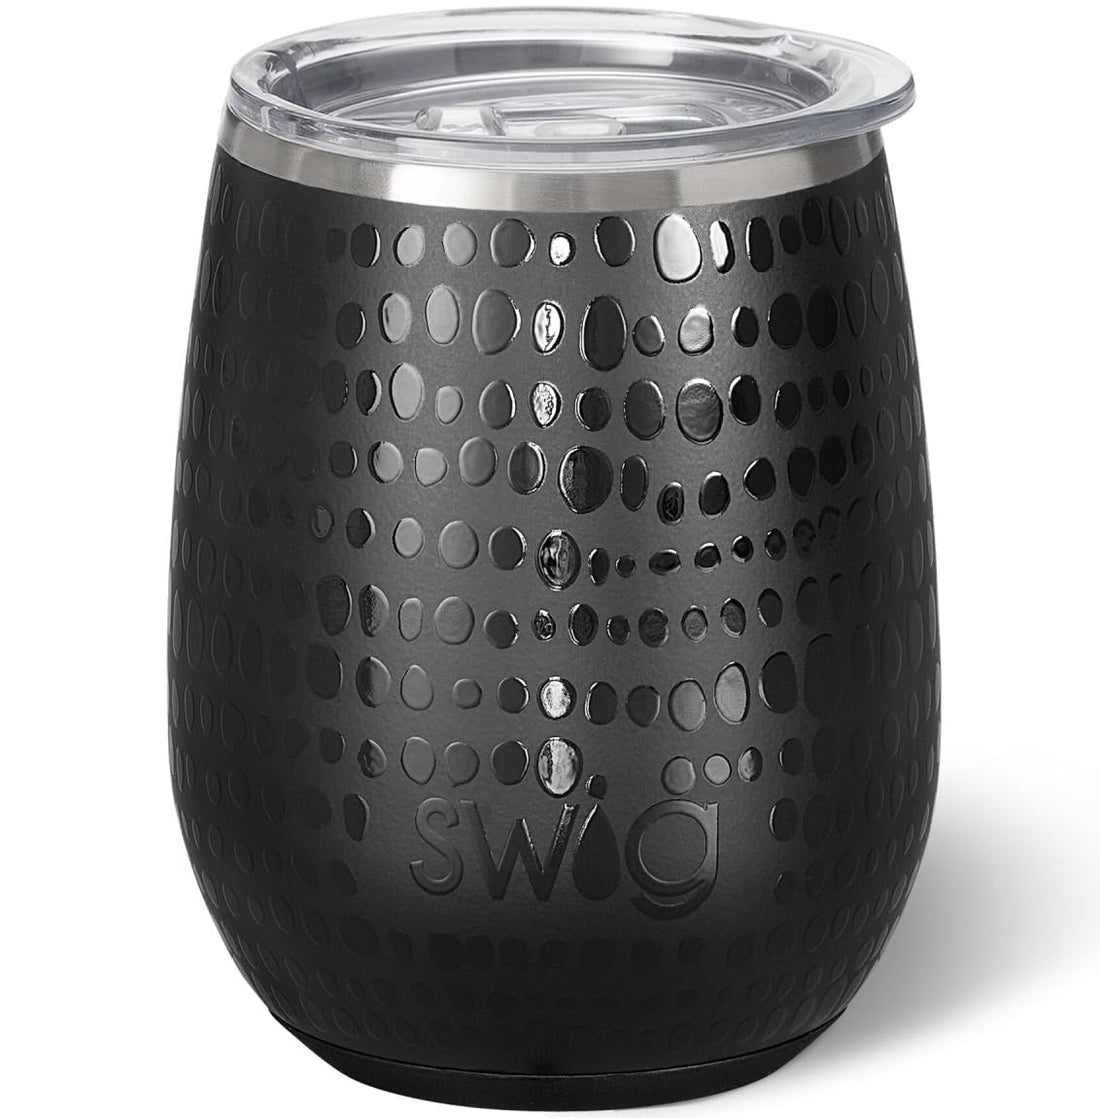 Swig 14oz Wine Tumbler | Insulated Wine Tumbler with Lid, Dishwasher Safe, Stainless Steel Wine Tumblers for Women, Insulated Wine (Glamazon Onyx)